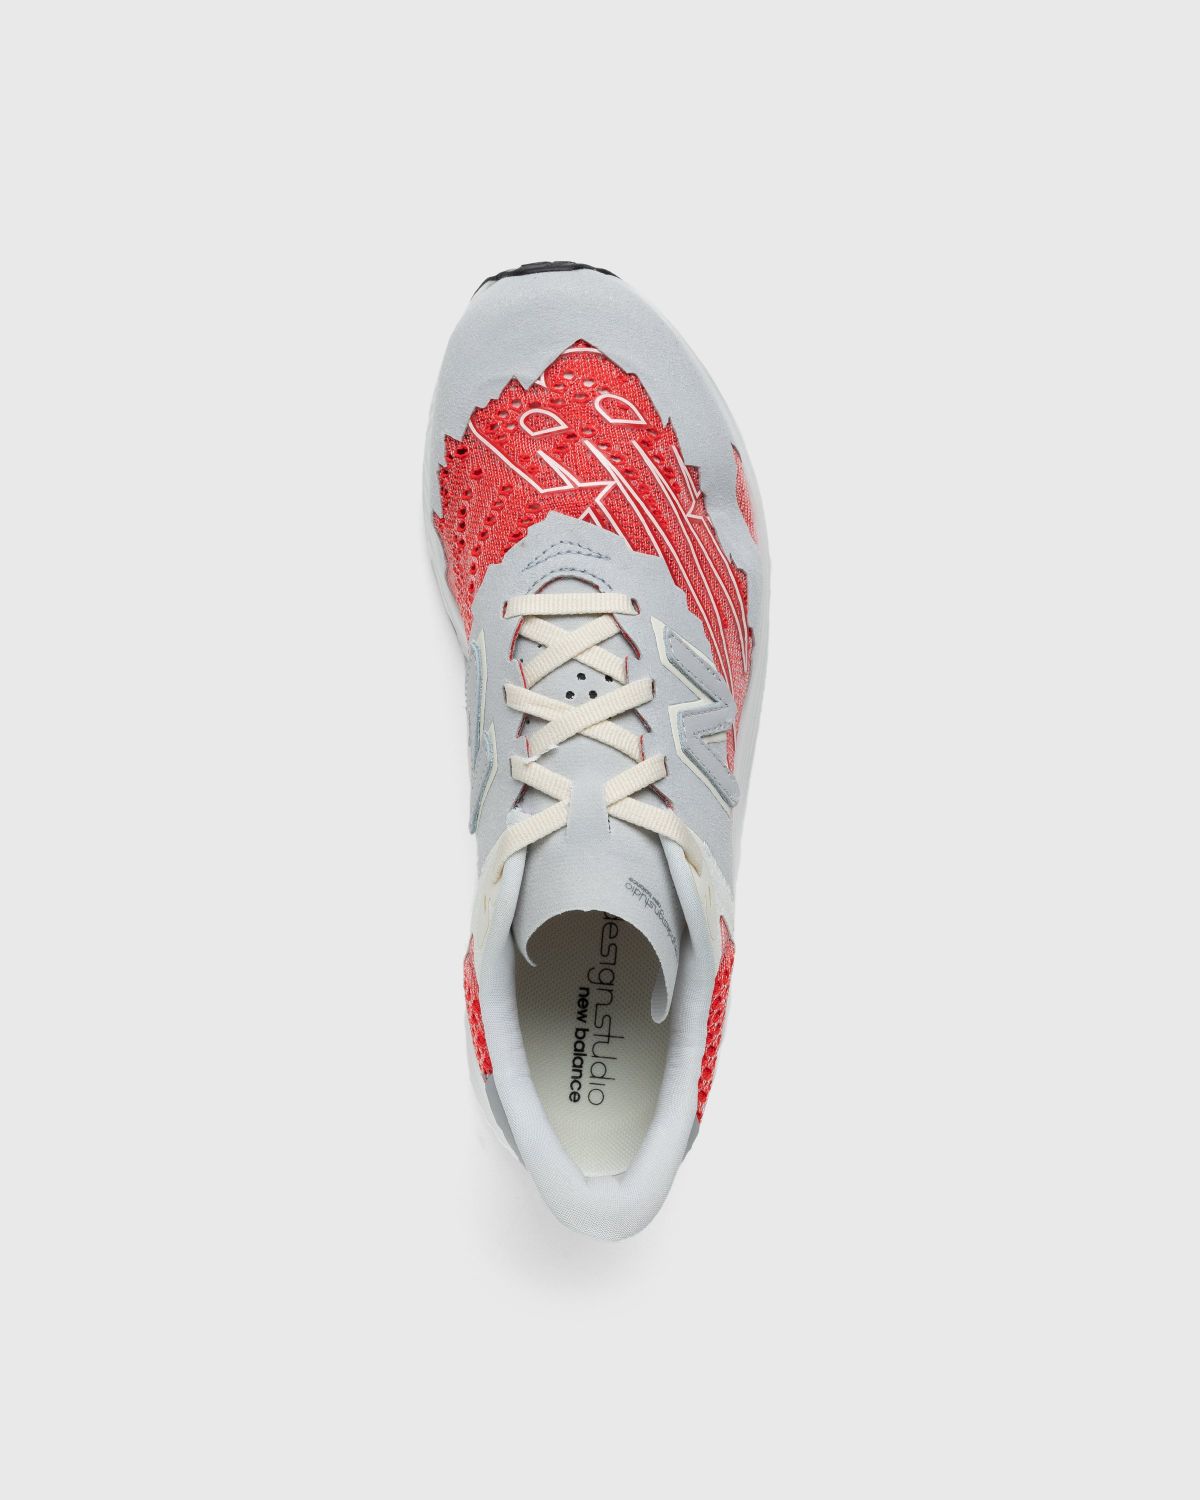 New Balance x Stone Island – FuelCell RC Elite v2 Neo Flame - Sneakers - Red - Image 6